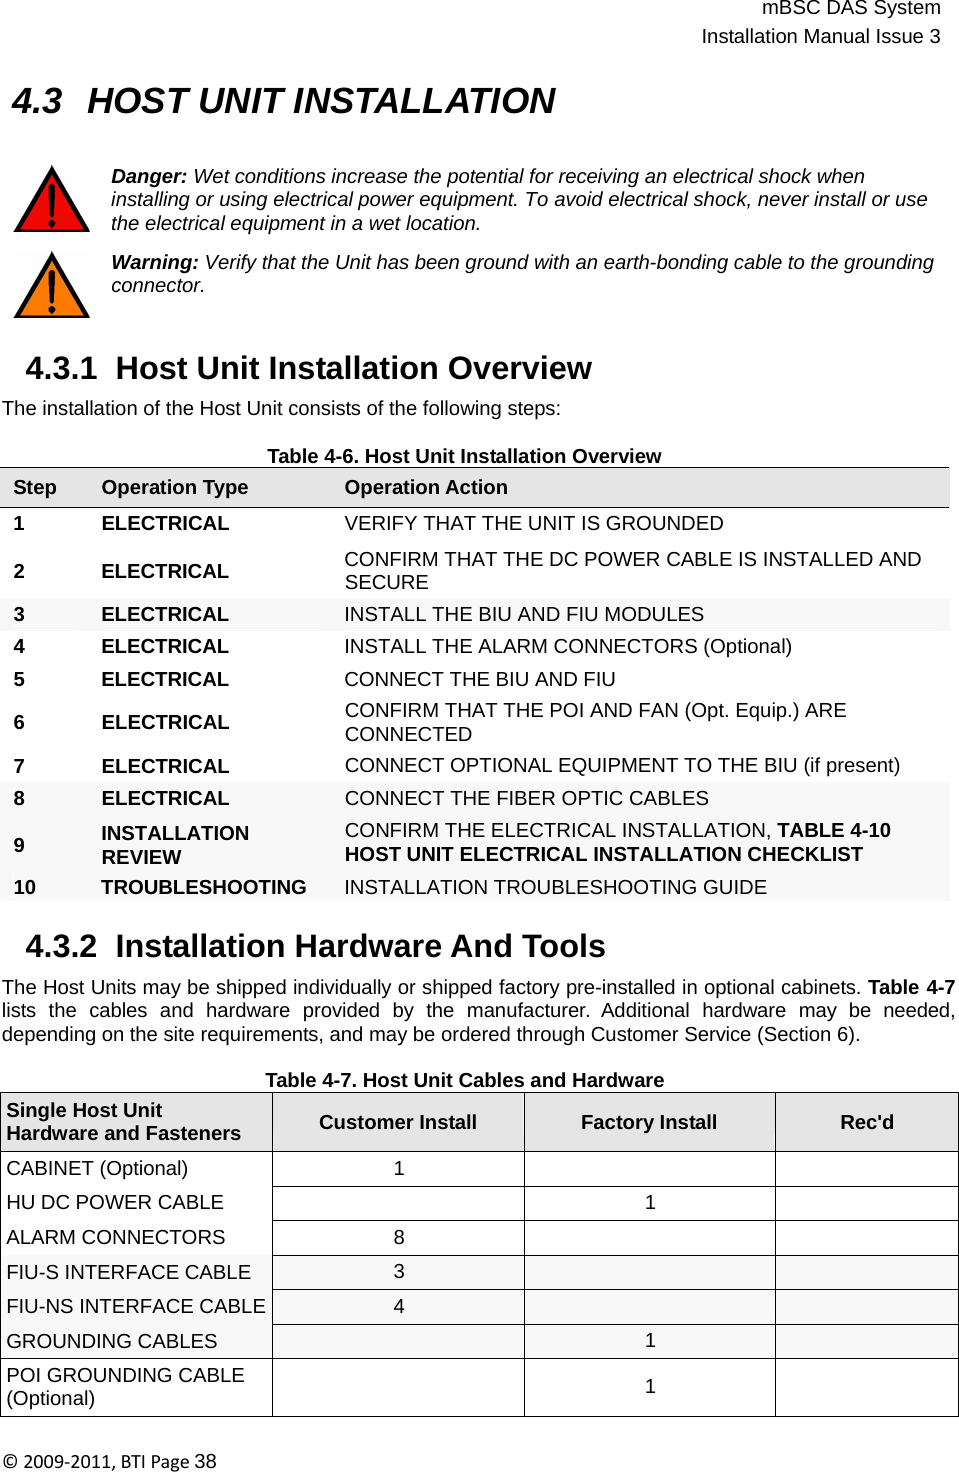 mBSC DAS SystemInstallation Manual Issue 3©2009‐2011,BTIPage38    4.3  HOST UNIT INSTALLATION   Danger: Wet conditions increase the potential for receiving an electrical shock when installing or using electrical power equipment. To avoid electrical shock, never install or use the electrical equipment in a wet location.  Warning: Verify that the Unit has been ground with an earth-bonding cable to the grounding connector.    4.3.1  Host Unit Installation Overview  The installation of the Host Unit consists of the following steps:  Table 4-6. Host Unit Installation Overview Step Operation Type Operation Action 1 ELECTRICAL VERIFY THAT THE UNIT IS GROUNDED  2 ELECTRICAL  CONFIRM THAT THE DC POWER CABLE IS INSTALLED AND SECURE  3 ELECTRICAL  INSTALL THE BIU AND FIU MODULES 4 ELECTRICAL  INSTALL THE ALARM CONNECTORS (Optional) 5 ELECTRICAL  CONNECT THE BIU AND FIU   6  ELECTRICAL CONFIRM THAT THE POI AND FAN (Opt. Equip.) ARE CONNECTED 7 ELECTRICAL CONNECT OPTIONAL EQUIPMENT TO THE BIU (if present) 8 ELECTRICAL CONNECT THE FIBER OPTIC CABLES 9  INSTALLATION REVIEW CONFIRM THE ELECTRICAL INSTALLATION, TABLE 4-10 HOST UNIT ELECTRICAL INSTALLATION CHECKLIST 10 TROUBLESHOOTING INSTALLATION TROUBLESHOOTING GUIDE  4.3.2  Installation Hardware And Tools  The Host Units may be shipped individually or shipped factory pre-installed in optional cabinets. Table 4-7 lists  the  cables  and  hardware  provided  by  the  manufacturer.  Additional  hardware  may  be  needed, depending on the site requirements, and may be ordered through Customer Service (Section 6).  Table 4-7. Host Unit Cables and Hardware Single Host Unit Hardware and Fasteners  Customer Install  Factory Install  Rec&apos;d 1    1  CABINET (Optional) HU DC POWER CABLE ALARM CONNECTORS 8   3    4    FIU-S INTERFACE CABLE FIU-NS INTERFACE CABLE GROUNDING CABLES  1  POI GROUNDING CABLE (Optional)   1  